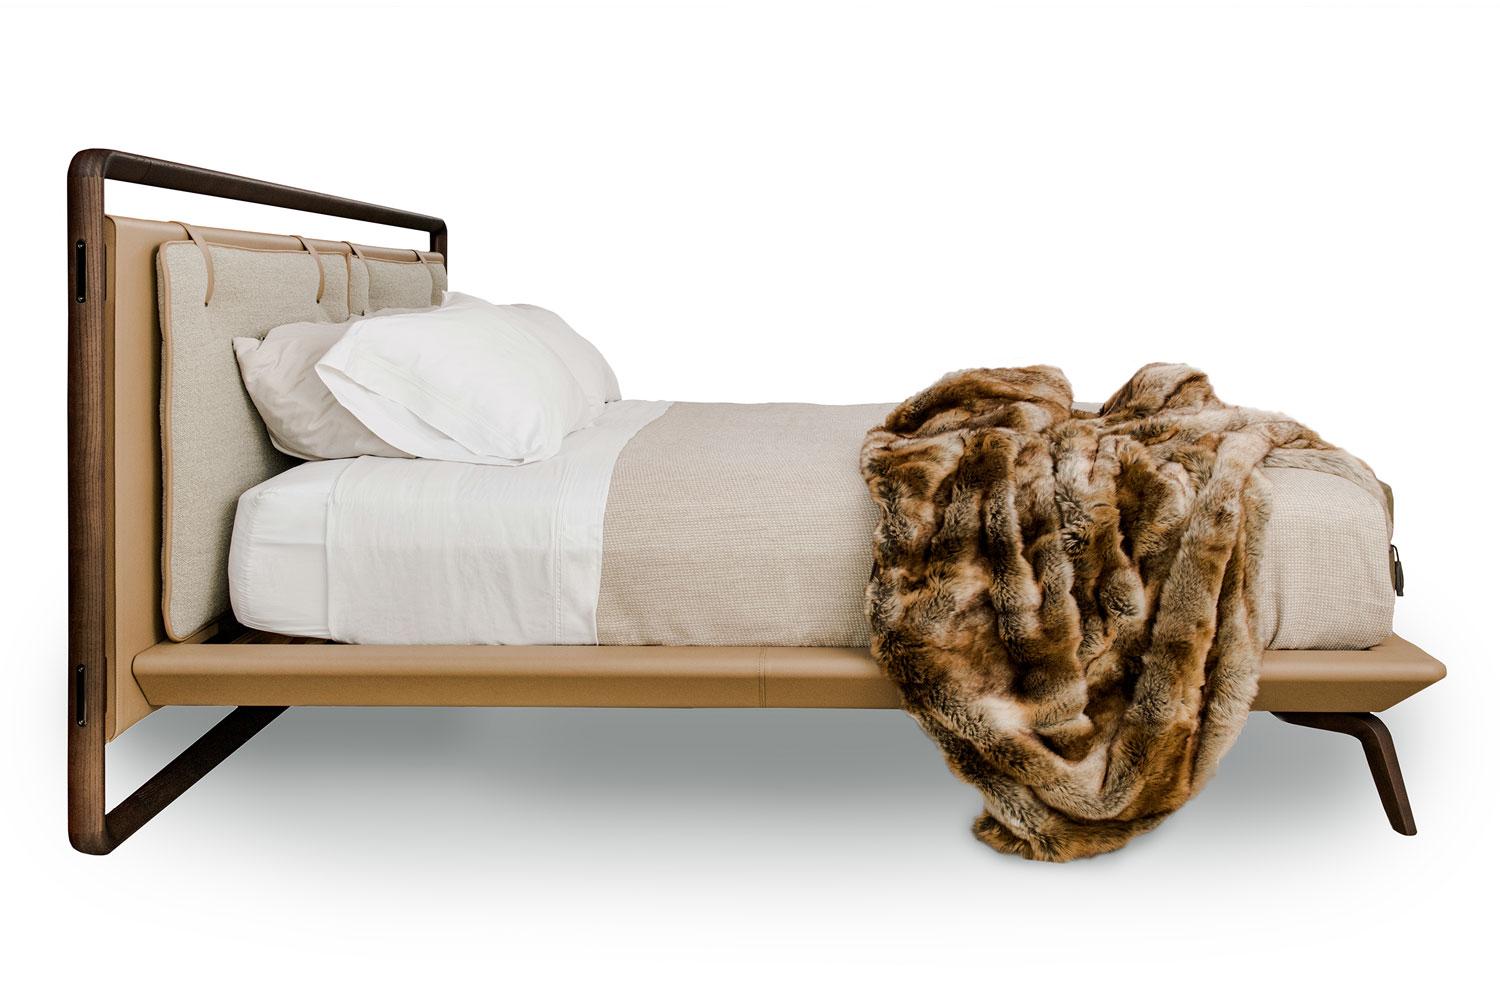 King size Volare Due bed, Poltrona Frau*

The bed frame is in tulipwood and entirely upholstered in camel colored Cuoio Saddle Extra leather, just like the headboard, which is made of solid beech with internal crossbars in birch plywood and infill